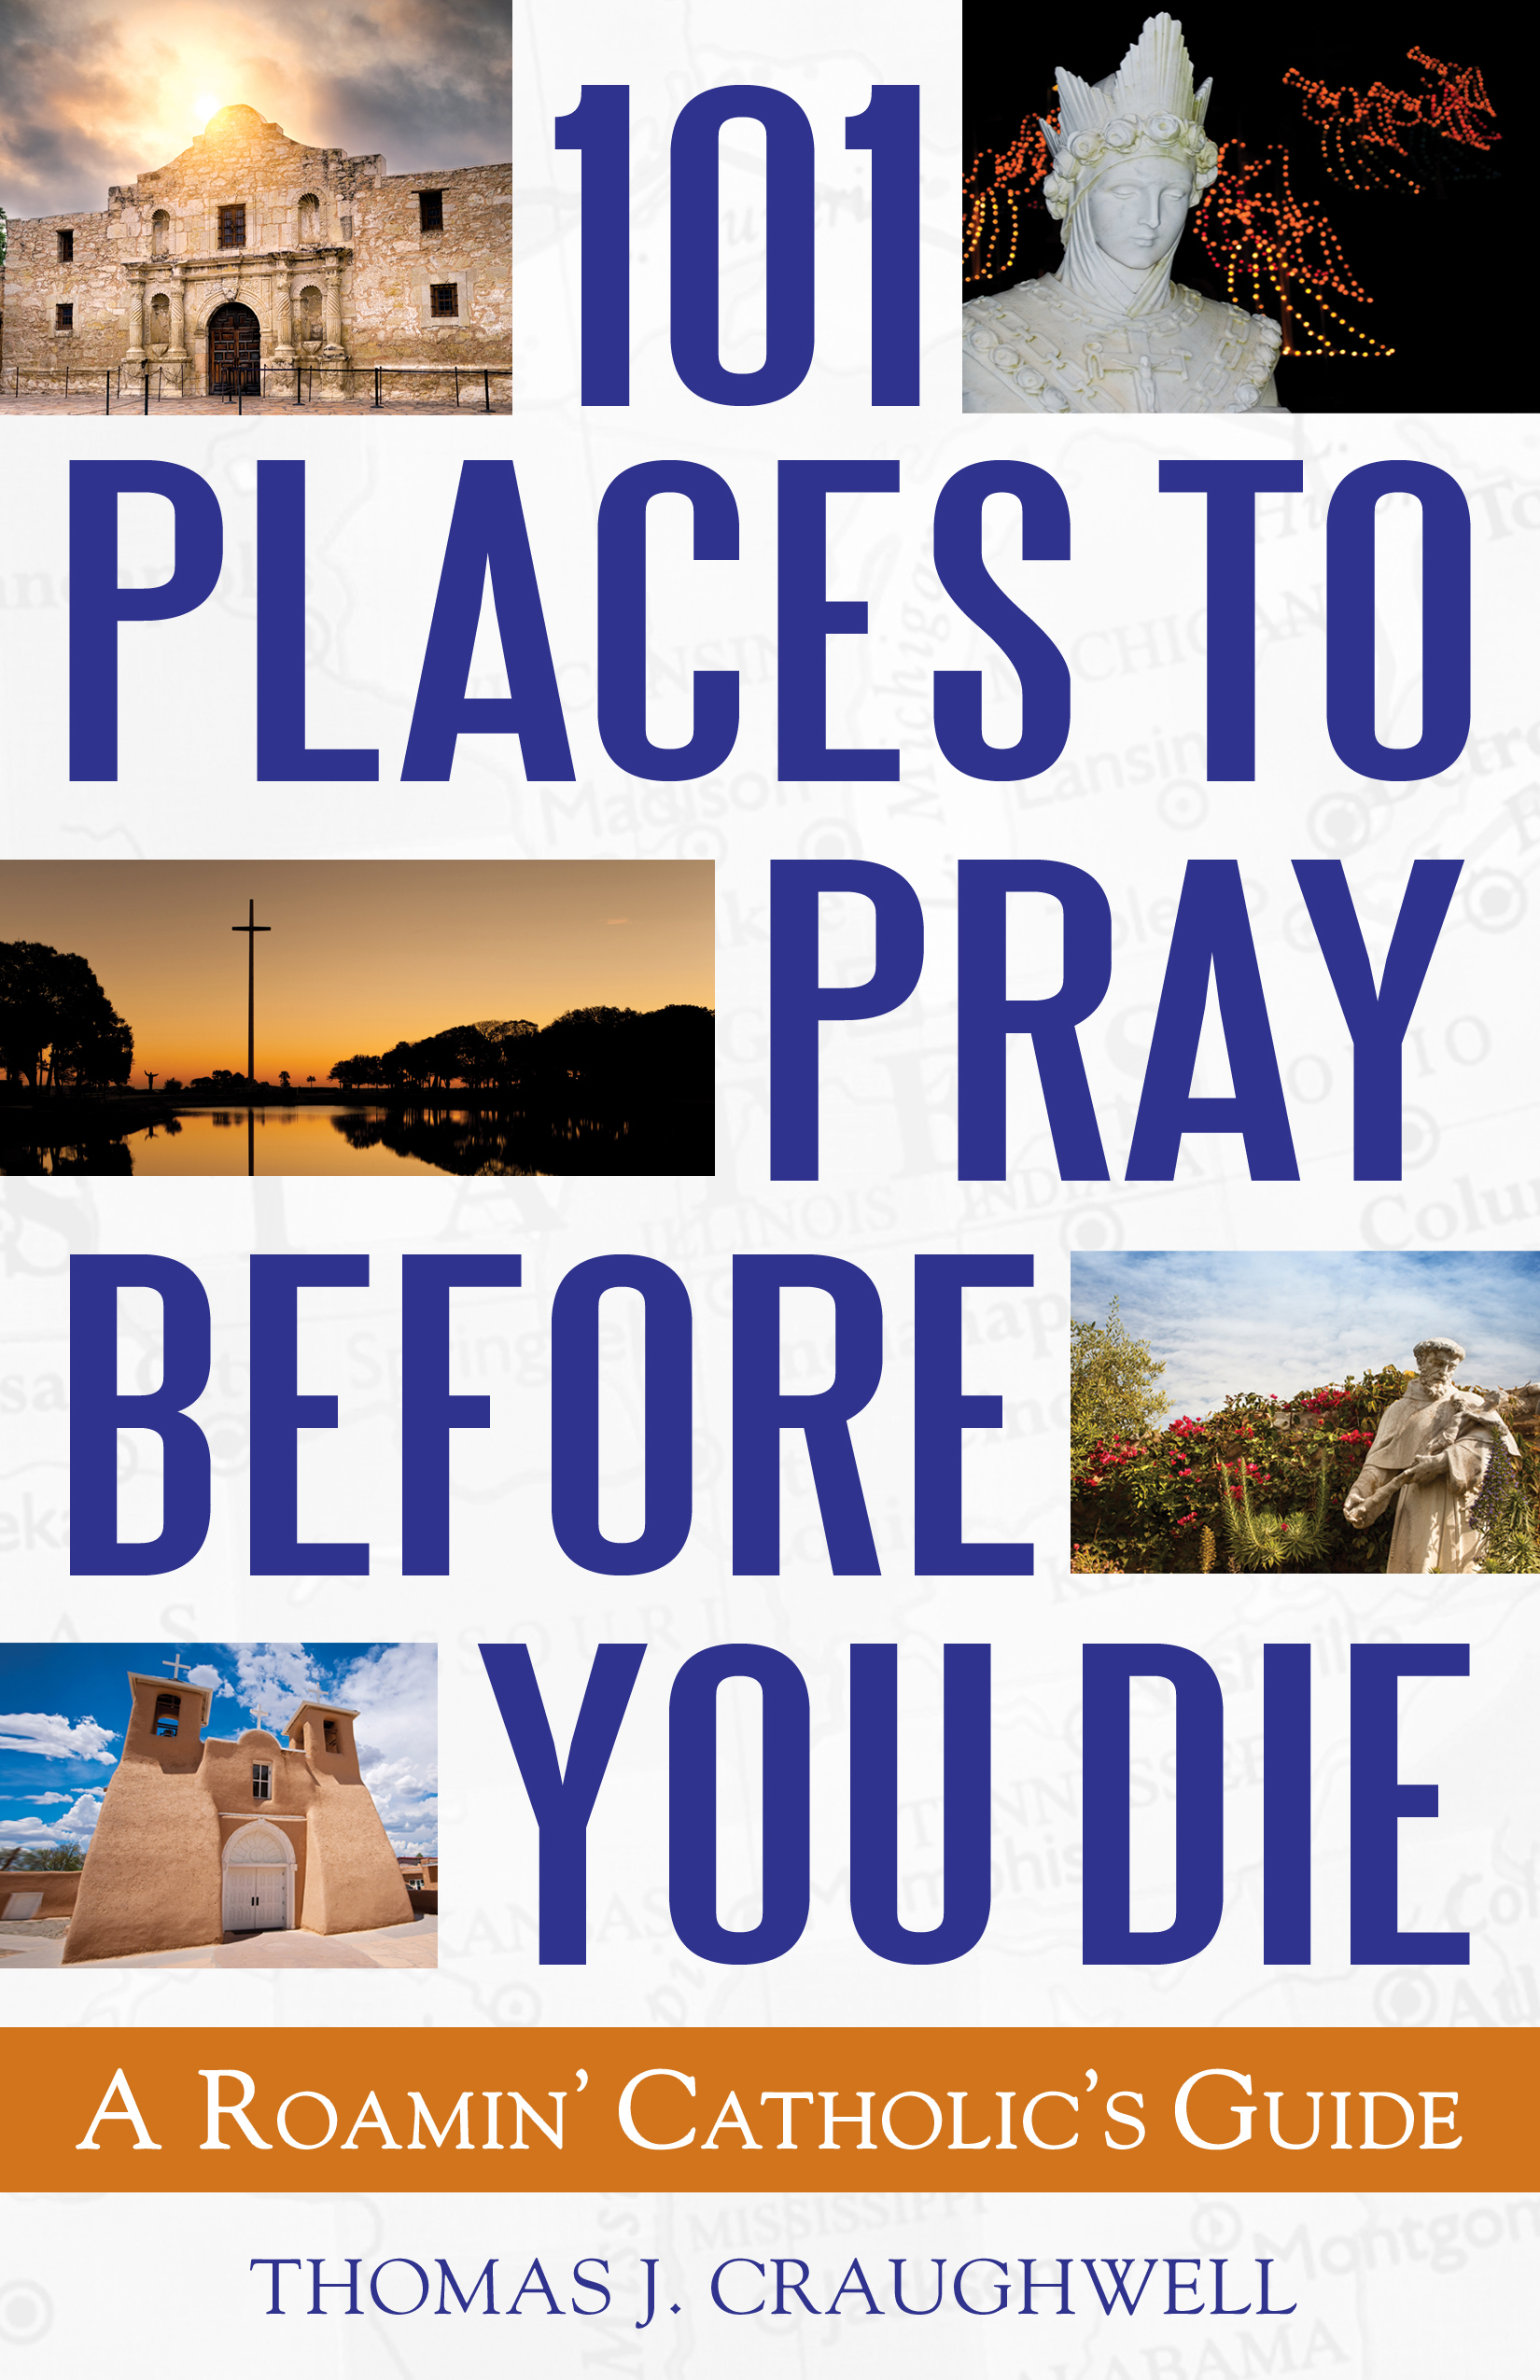 101 Places to Pray Before You Die / Thomas J Craughwell